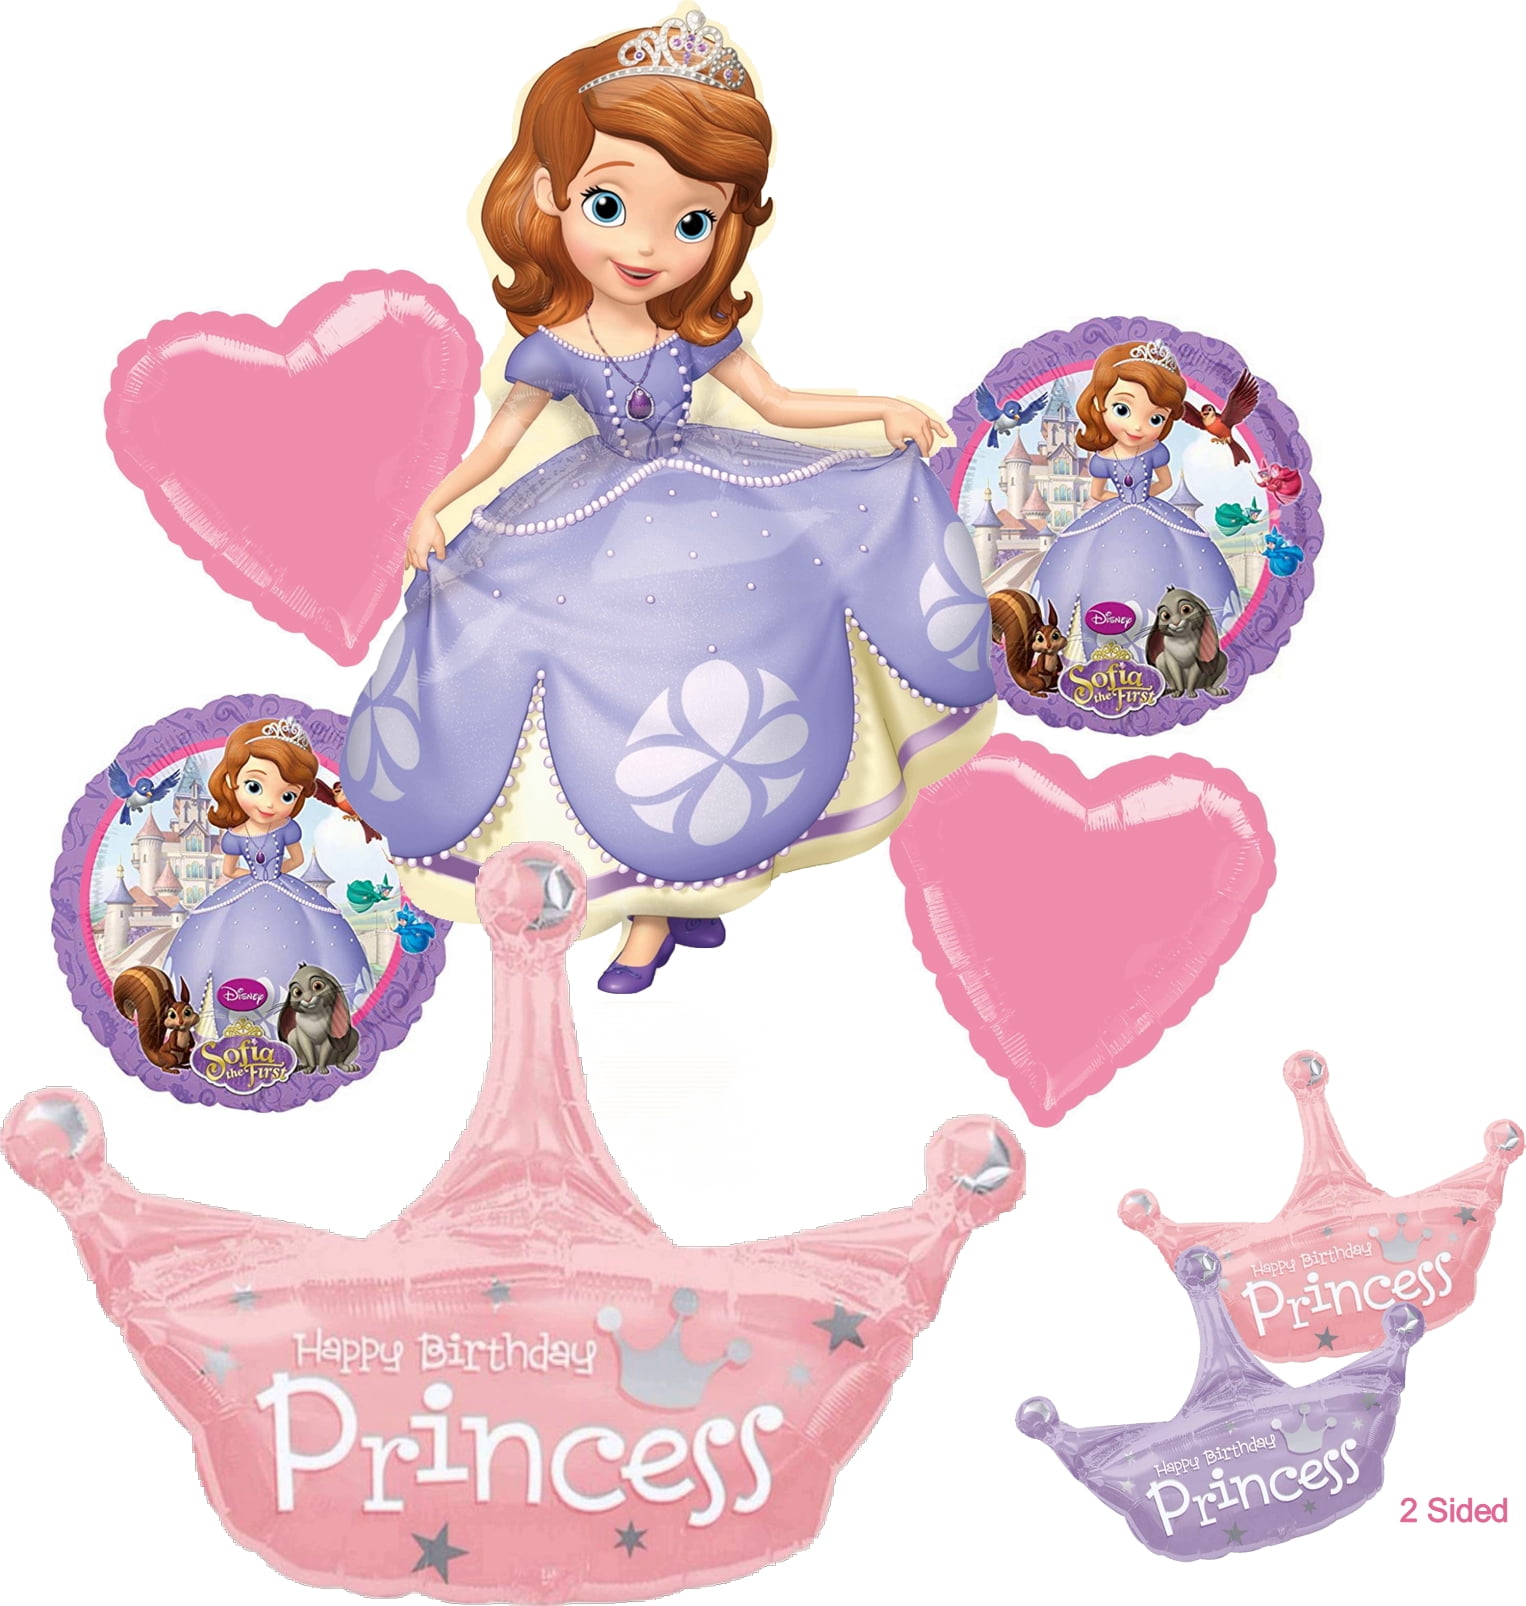 DISNEY PRINCESS SOFIA THE 1ST BIRTHDAY PARTY BALLOONS BOUQUET DECORATIONS  SUPPLIES (INCLUDES 6 BALLOONS) SOPHIA THE FIRST Anagram 